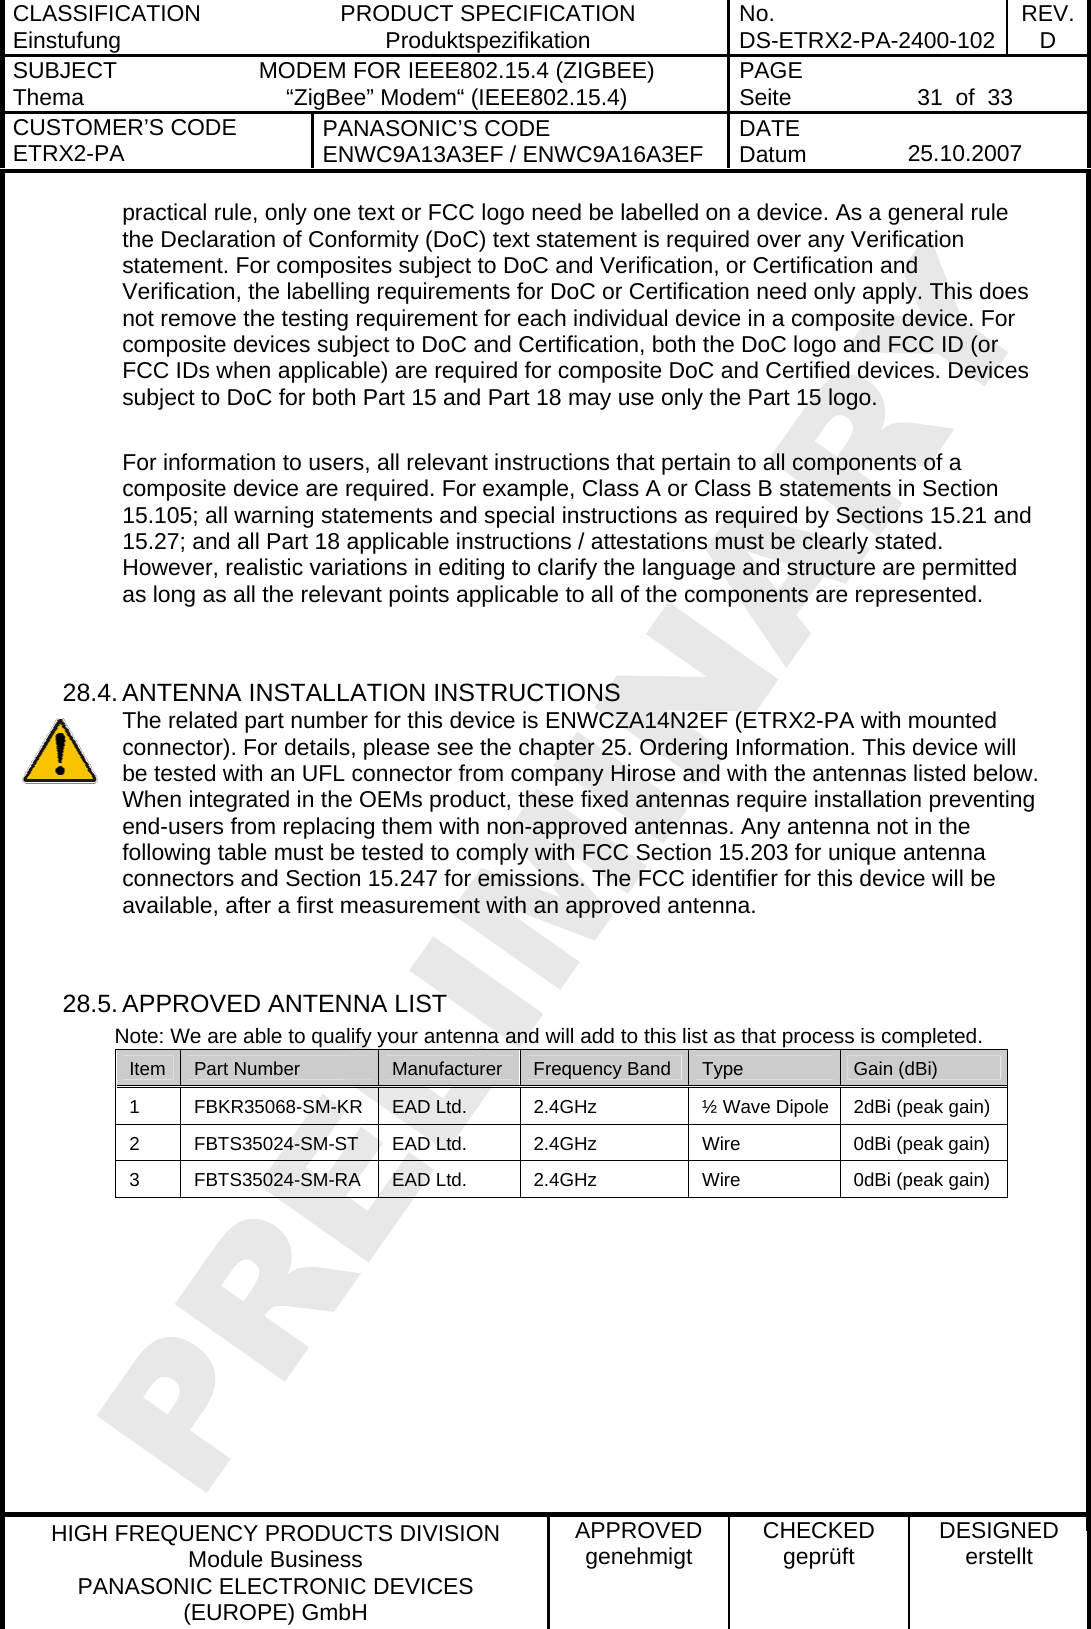 CLASSIFICATION Einstufung  PRODUCT SPECIFICATION Produktspezifikation  No. DS-ETRX2-PA-2400-102 REV.D SUBJECT Thema  MODEM FOR IEEE802.15.4 (ZIGBEE) “ZigBee” Modem“ (IEEE802.15.4)    PAGE Seite   31  of  33 CUSTOMER’S CODE ETRX2-PA  PANASONIC’S CODE ENWC9A13A3EF / ENWC9A16A3EF  DATE Datum   25.10.2007   HIGH FREQUENCY PRODUCTS DIVISION Module Business PANASONIC ELECTRONIC DEVICES  (EUROPE) GmbH APPROVED genehmigt  CHECKED geprüft  DESIGNED erstellt practical rule, only one text or FCC logo need be labelled on a device. As a general rule the Declaration of Conformity (DoC) text statement is required over any Verification statement. For composites subject to DoC and Verification, or Certification and Verification, the labelling requirements for DoC or Certification need only apply. This does not remove the testing requirement for each individual device in a composite device. For composite devices subject to DoC and Certification, both the DoC logo and FCC ID (or FCC IDs when applicable) are required for composite DoC and Certified devices. Devices subject to DoC for both Part 15 and Part 18 may use only the Part 15 logo.  For information to users, all relevant instructions that pertain to all components of a composite device are required. For example, Class A or Class B statements in Section 15.105; all warning statements and special instructions as required by Sections 15.21 and 15.27; and all Part 18 applicable instructions / attestations must be clearly stated. However, realistic variations in editing to clarify the language and structure are permitted as long as all the relevant points applicable to all of the components are represented.   28.4. ANTENNA INSTALLATION INSTRUCTIONS The related part number for this device is ENWCZA14N2EF (ETRX2-PA with mounted connector). For details, please see the chapter 25. Ordering Information. This device will be tested with an UFL connector from company Hirose and with the antennas listed below. When integrated in the OEMs product, these fixed antennas require installation preventing end-users from replacing them with non-approved antennas. Any antenna not in the following table must be tested to comply with FCC Section 15.203 for unique antenna connectors and Section 15.247 for emissions. The FCC identifier for this device will be available, after a first measurement with an approved antenna.   28.5. APPROVED ANTENNA LIST          Note: We are able to qualify your antenna and will add to this list as that process is completed. Item  Part Number  Manufacturer  Frequency Band  Type  Gain (dBi) 1  FBKR35068-SM-KR  EAD Ltd.  2.4GHz  ½ Wave Dipole  2dBi (peak gain) 2  FBTS35024-SM-ST  EAD Ltd.  2.4GHz  Wire  0dBi (peak gain) 3  FBTS35024-SM-RA  EAD Ltd.  2.4GHz  Wire  0dBi (peak gain)   